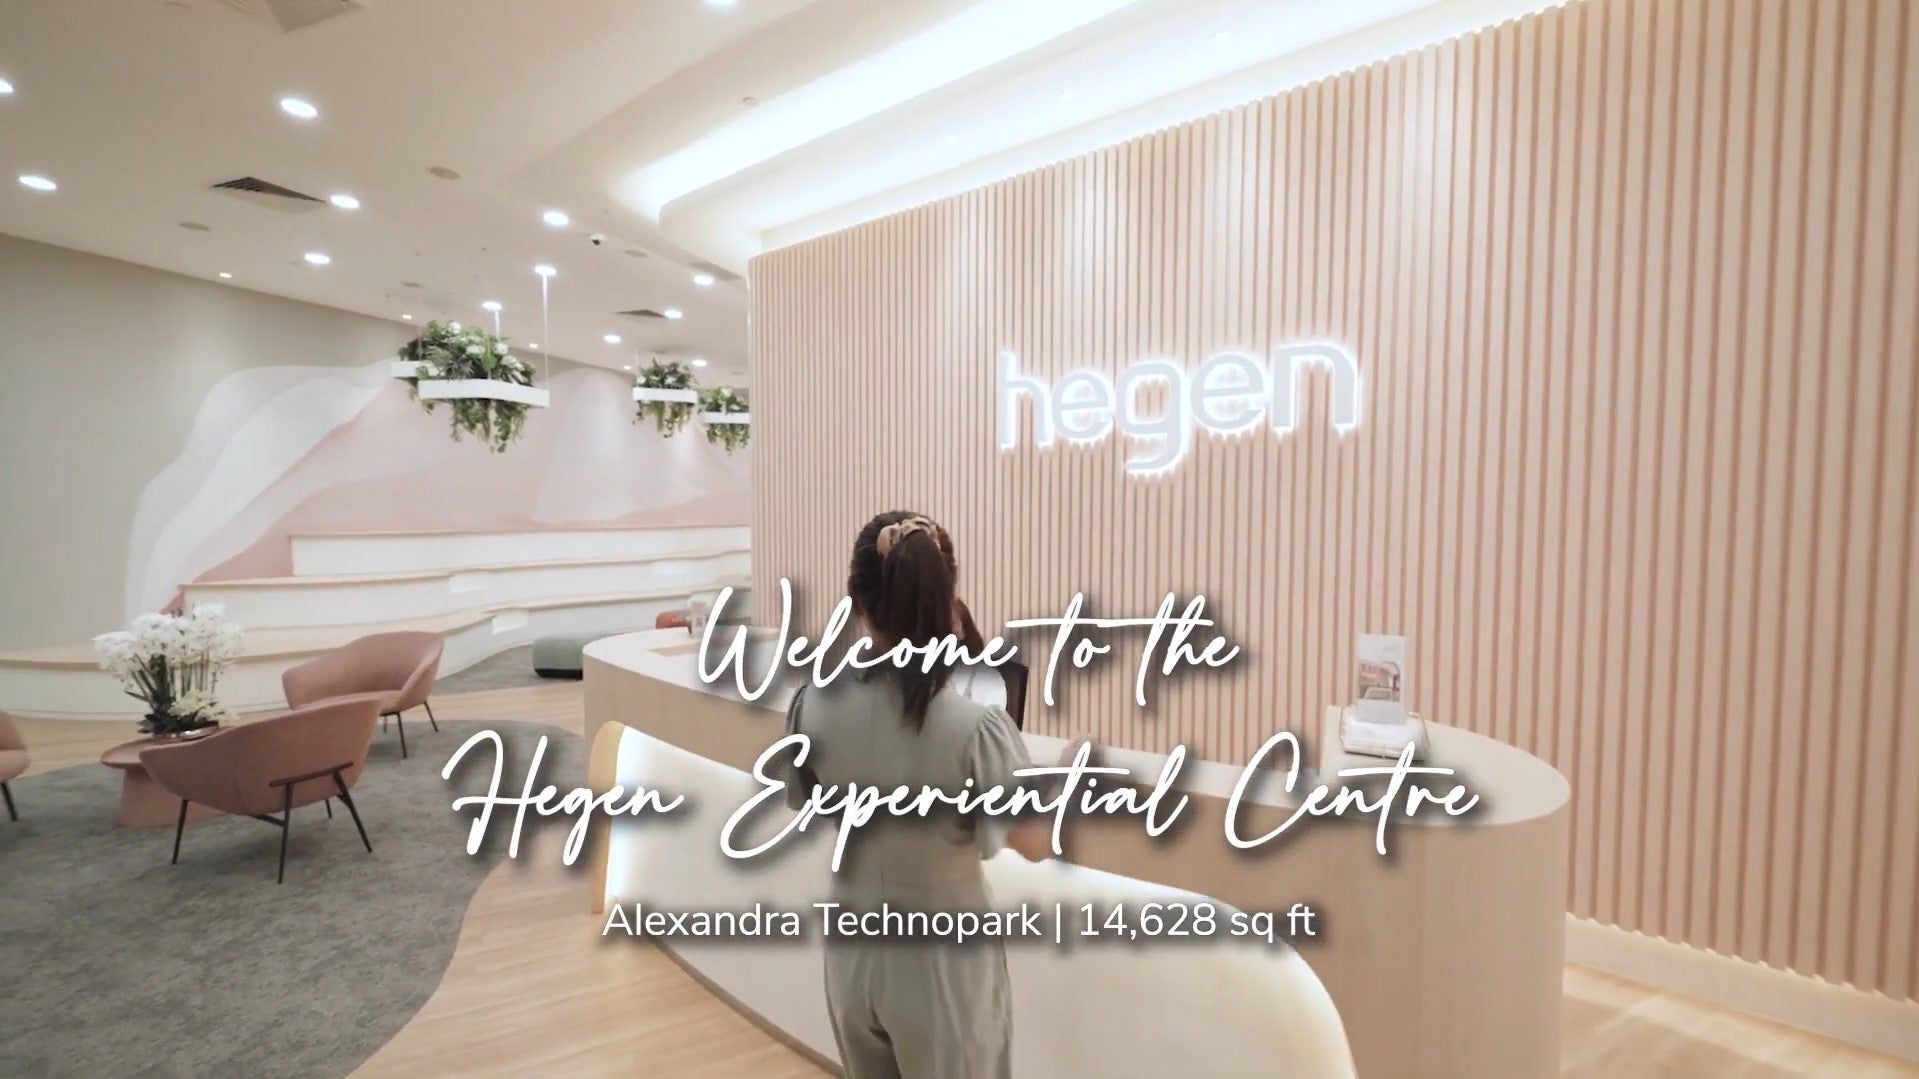 Load video: Welcome to the Hegen Experiential Centre